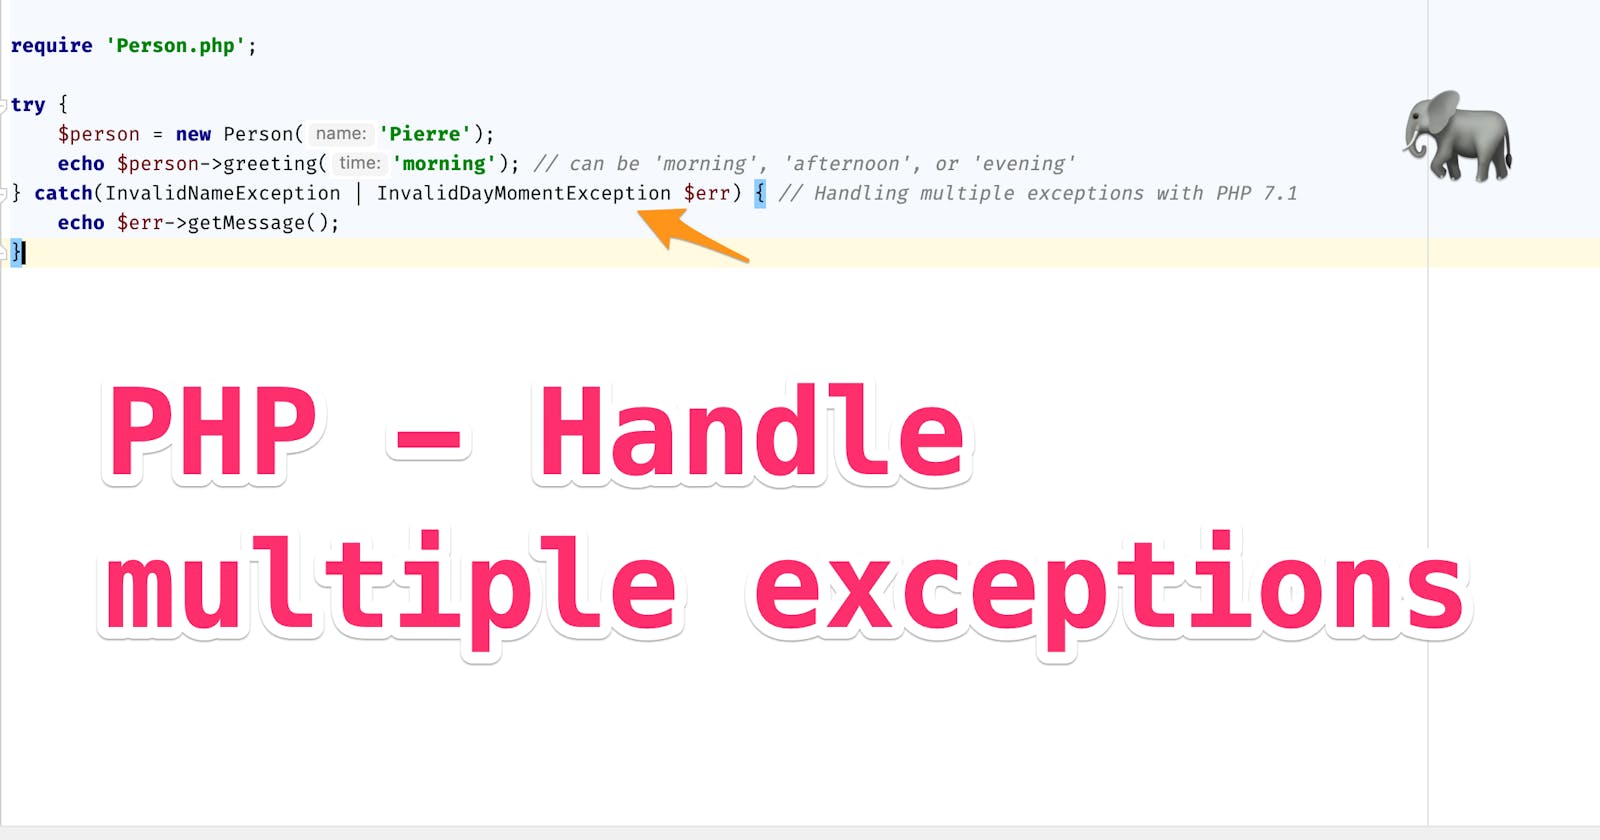 Handling Multiple Exceptions with PHP 7.1